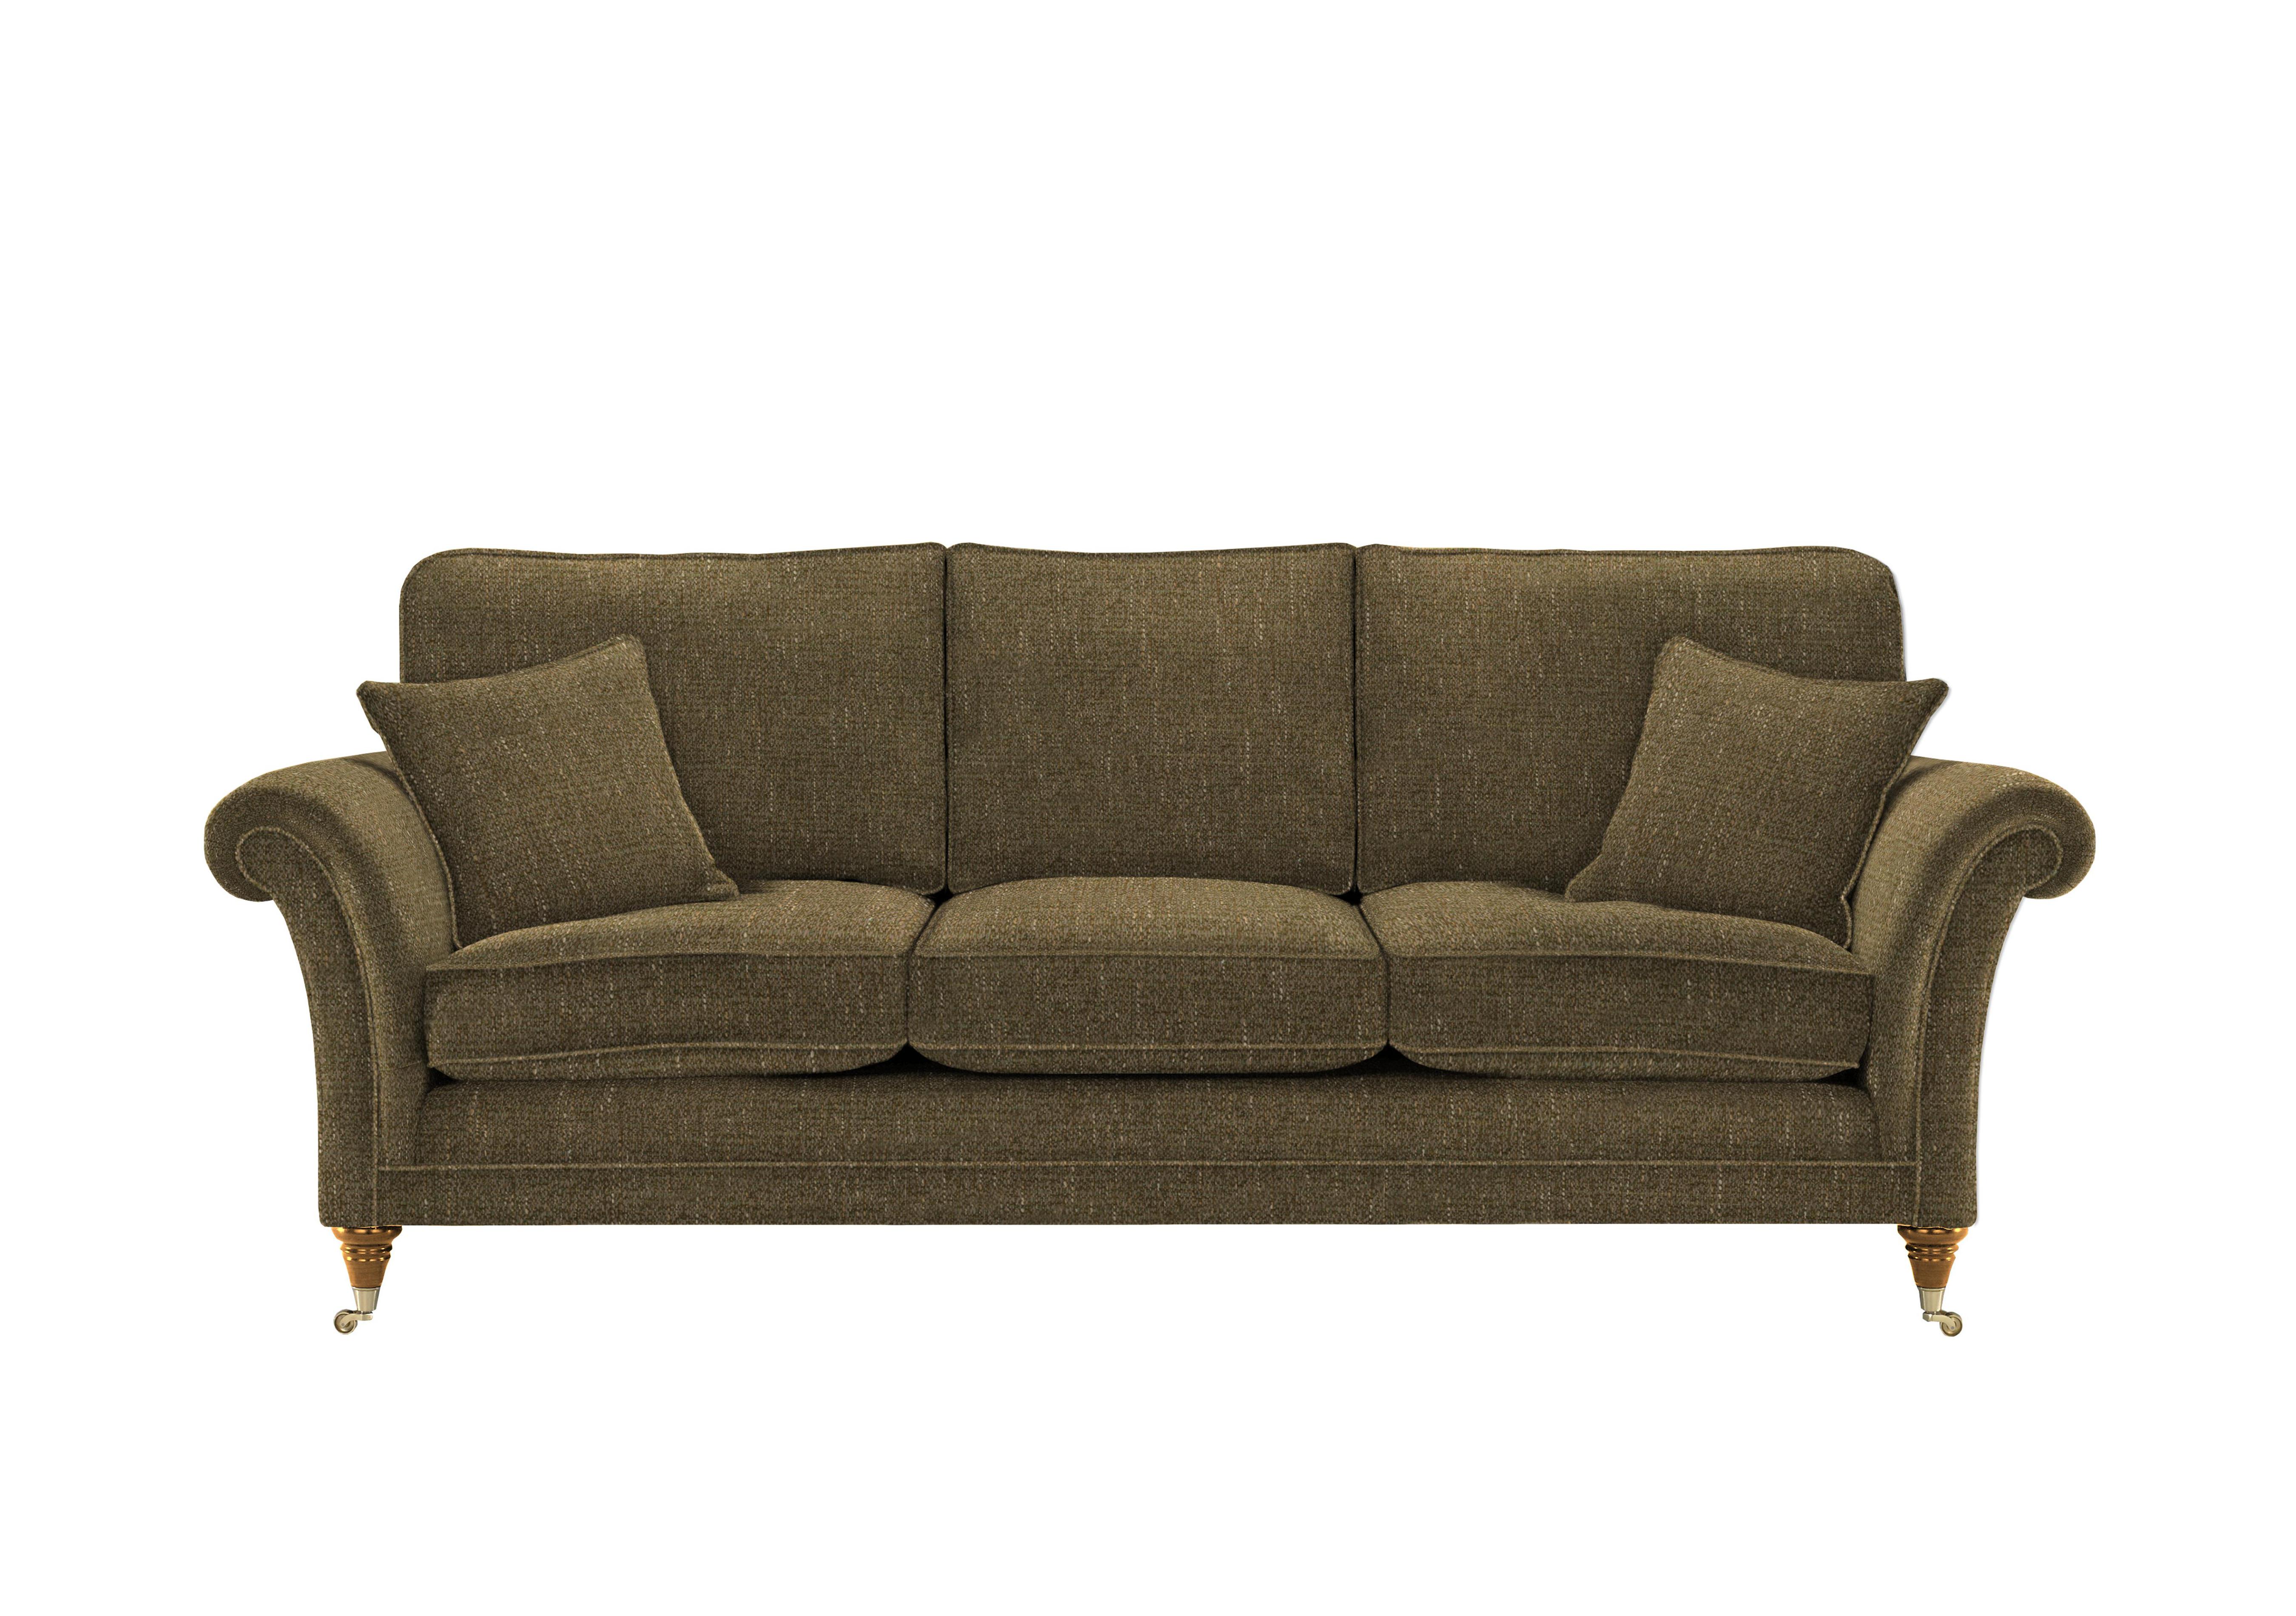 Burghley Grand 3 Seater Sofa in 001408-0065 Country Moss on Furniture Village